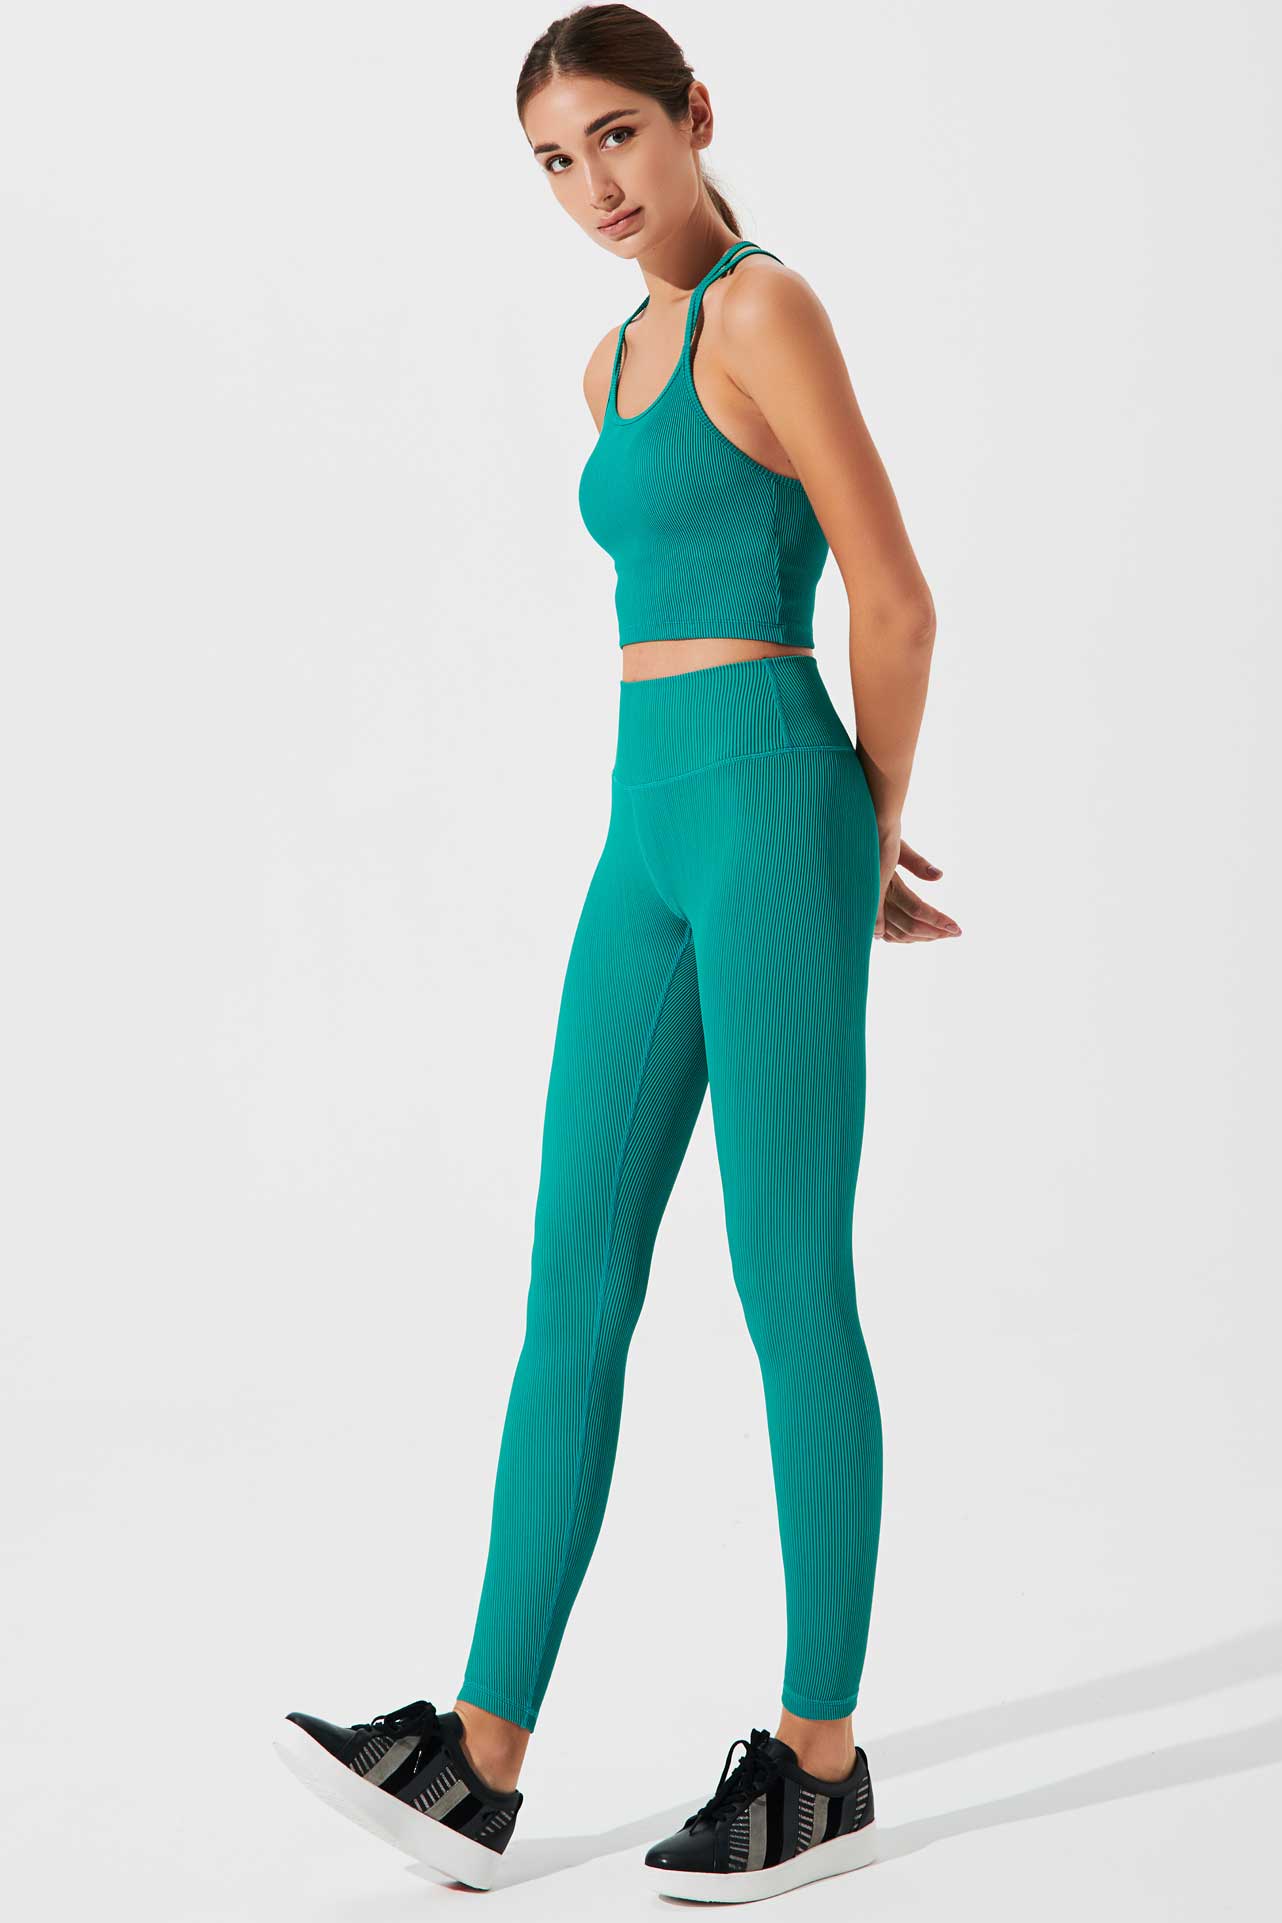 Stylish pine green high-waist leggings for women, perfect for a trendy and comfortable look.